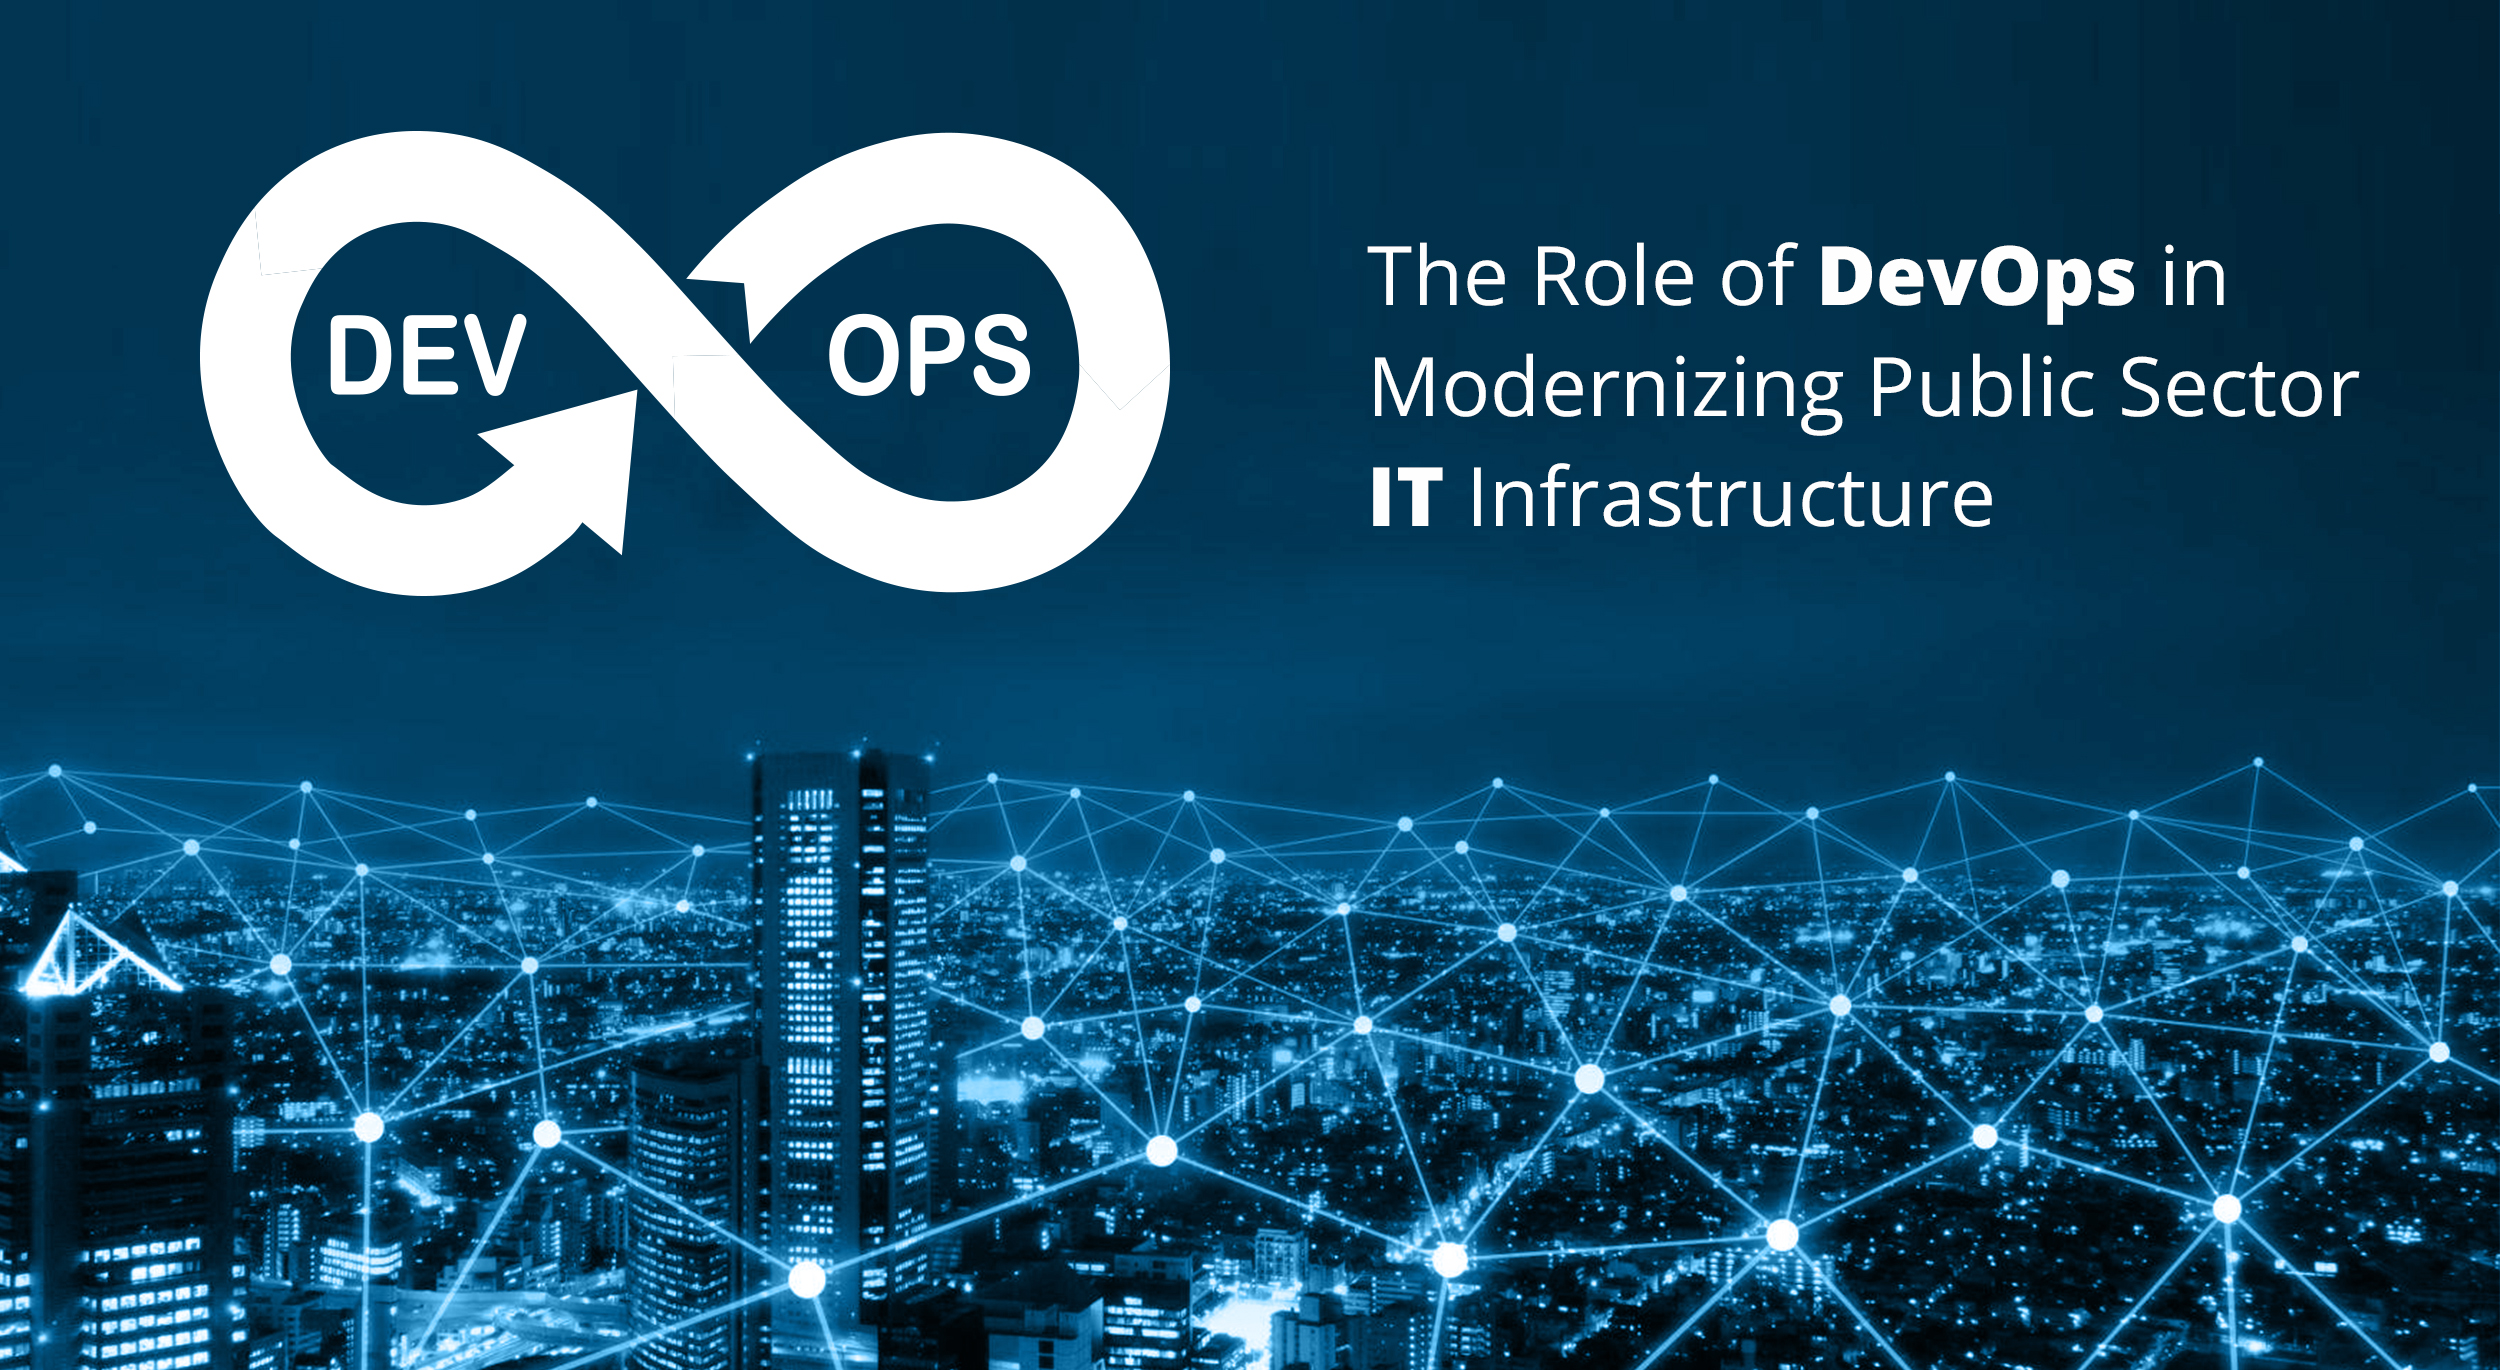 The Role of DevOps in Modernizing Public Sector IT Infrastructure - eSpace